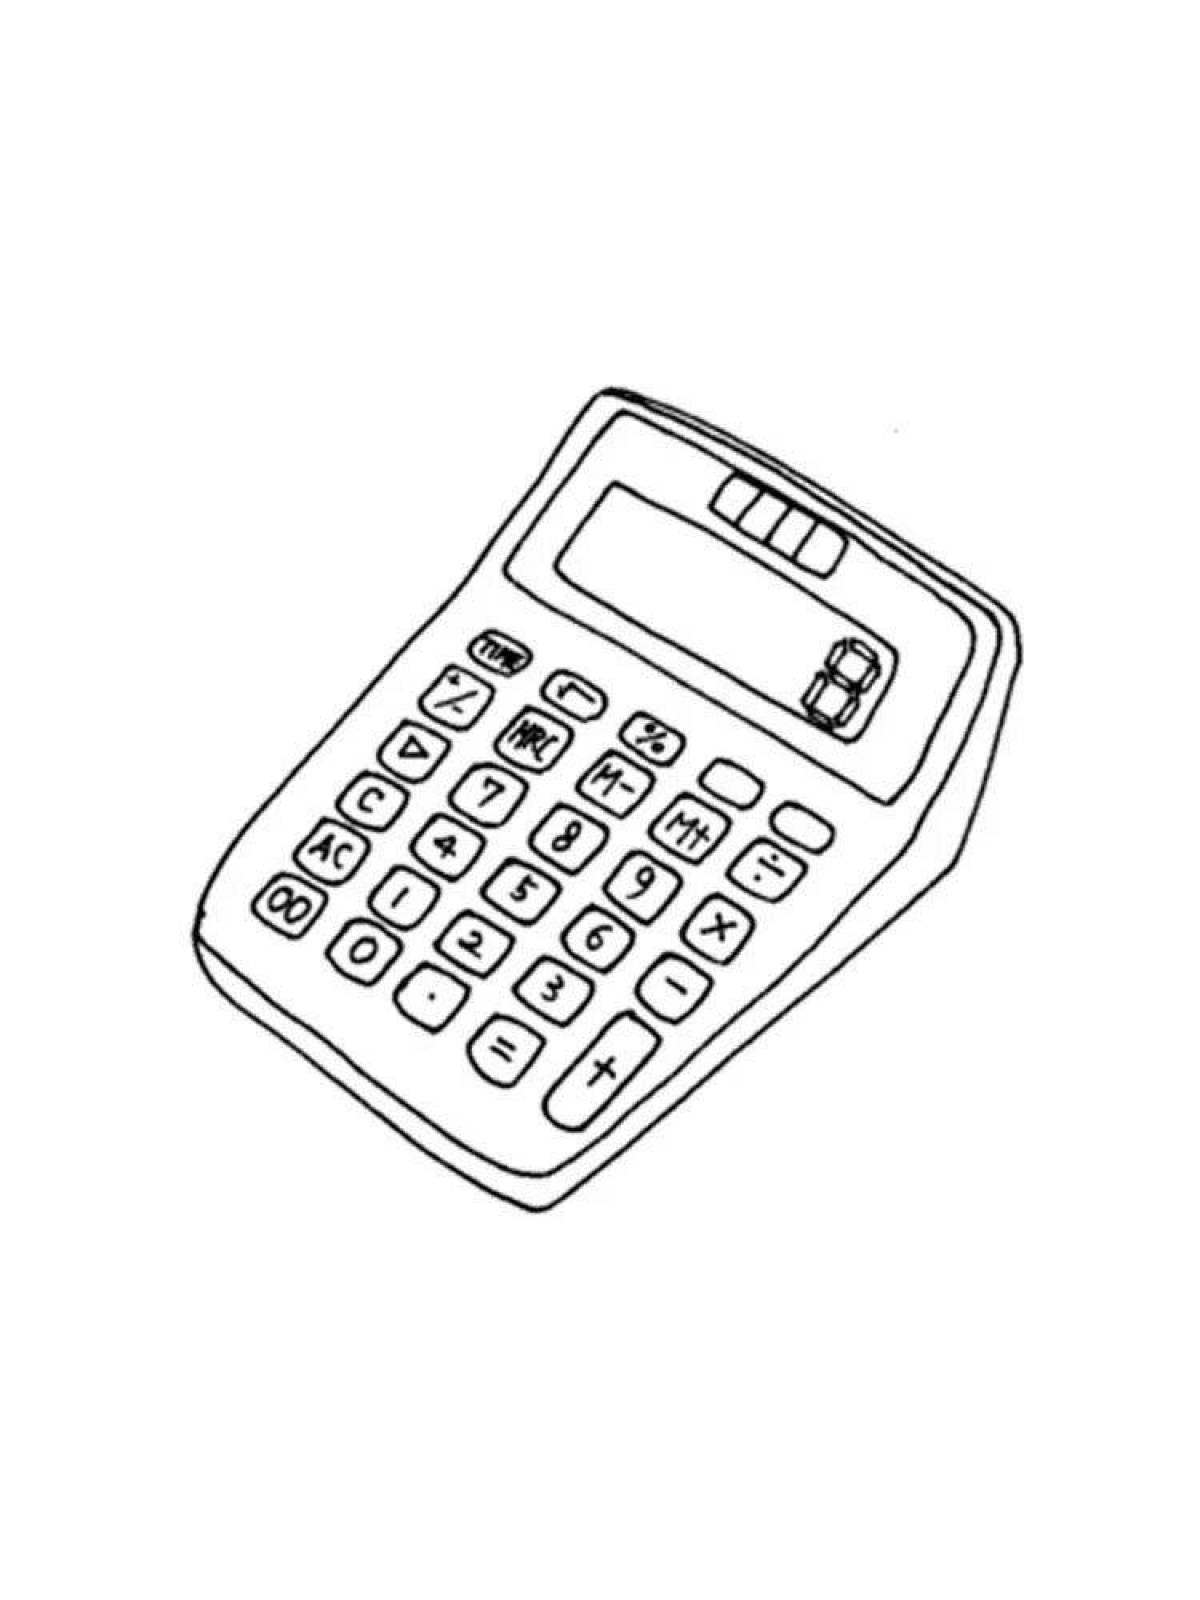 Gorgeous calculator coloring page